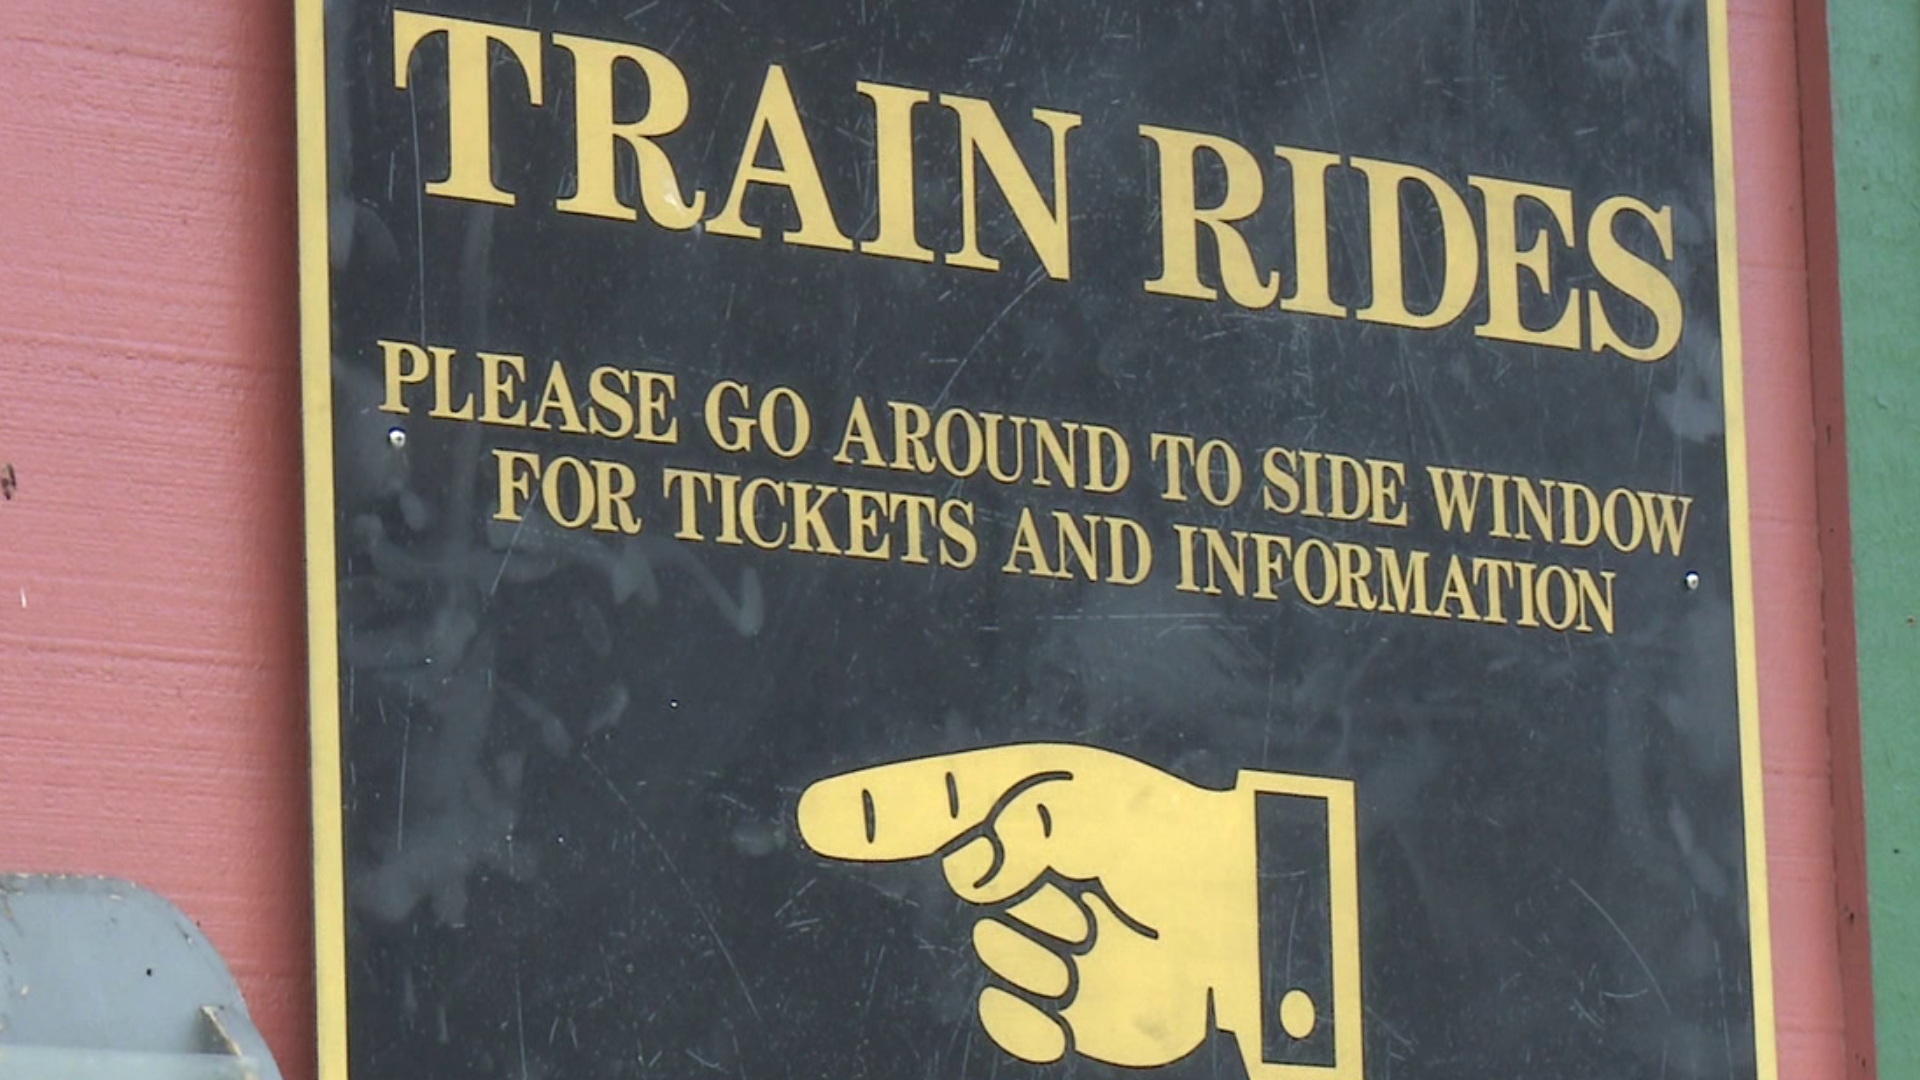 Reading & Northern Railroad will bring back the popular train rides with extra precautions against the coronavirus.